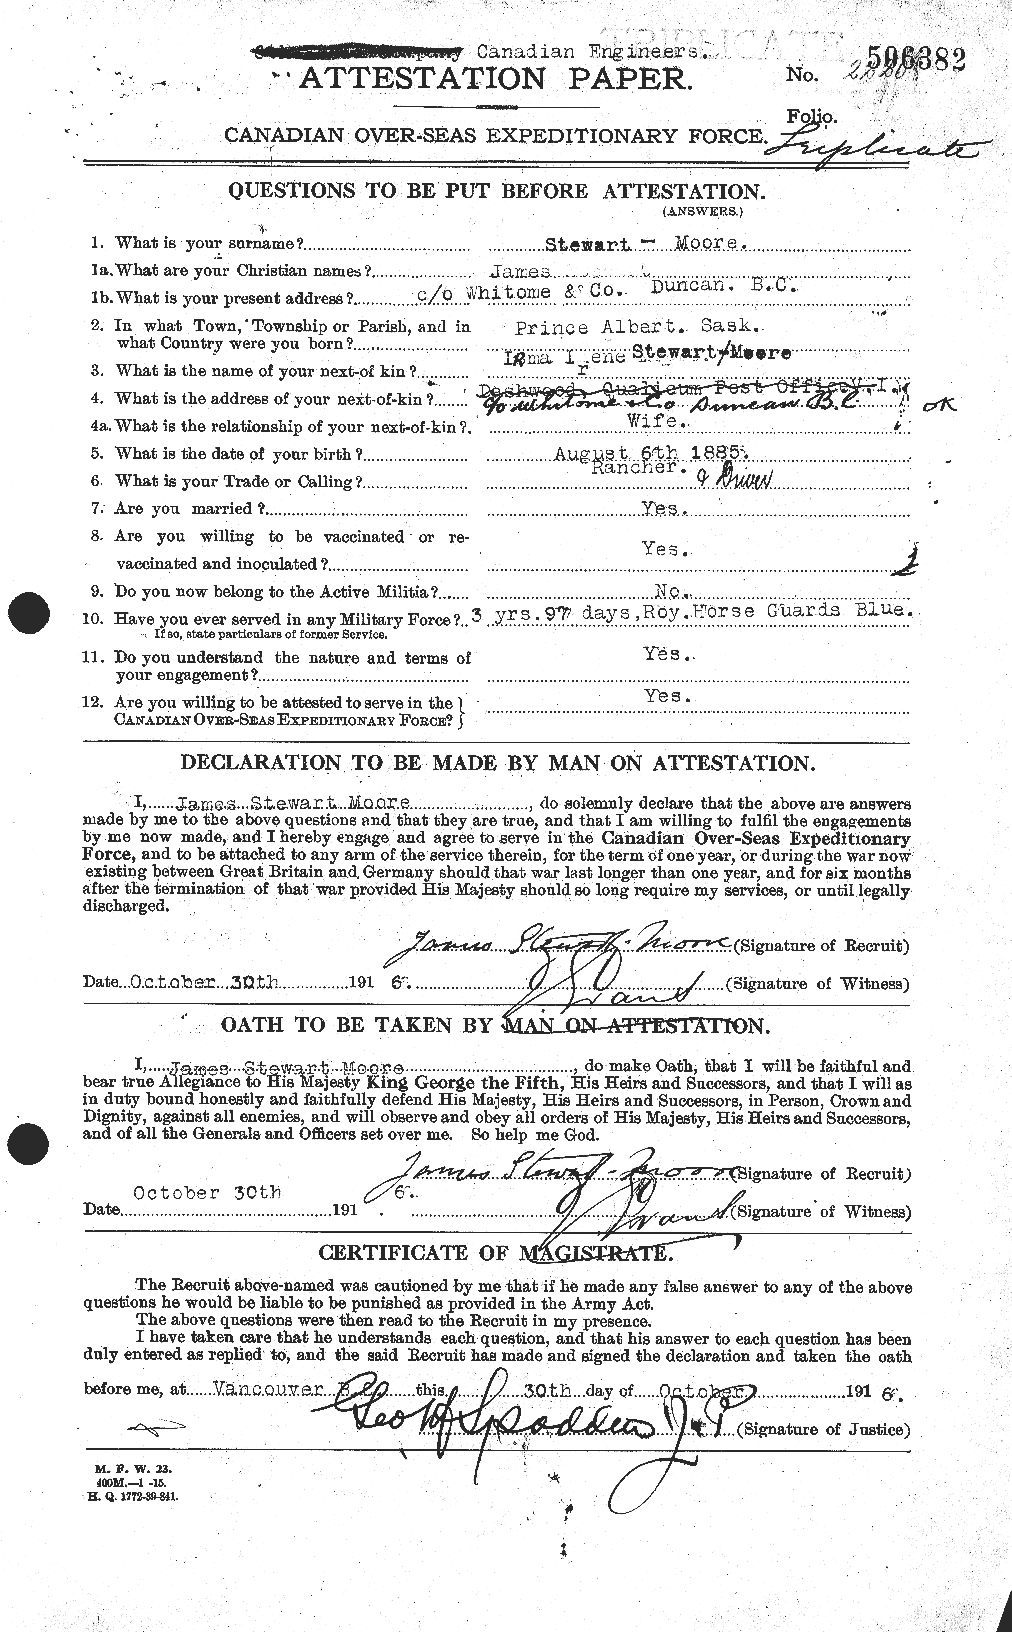 Personnel Records of the First World War - CEF 624973a